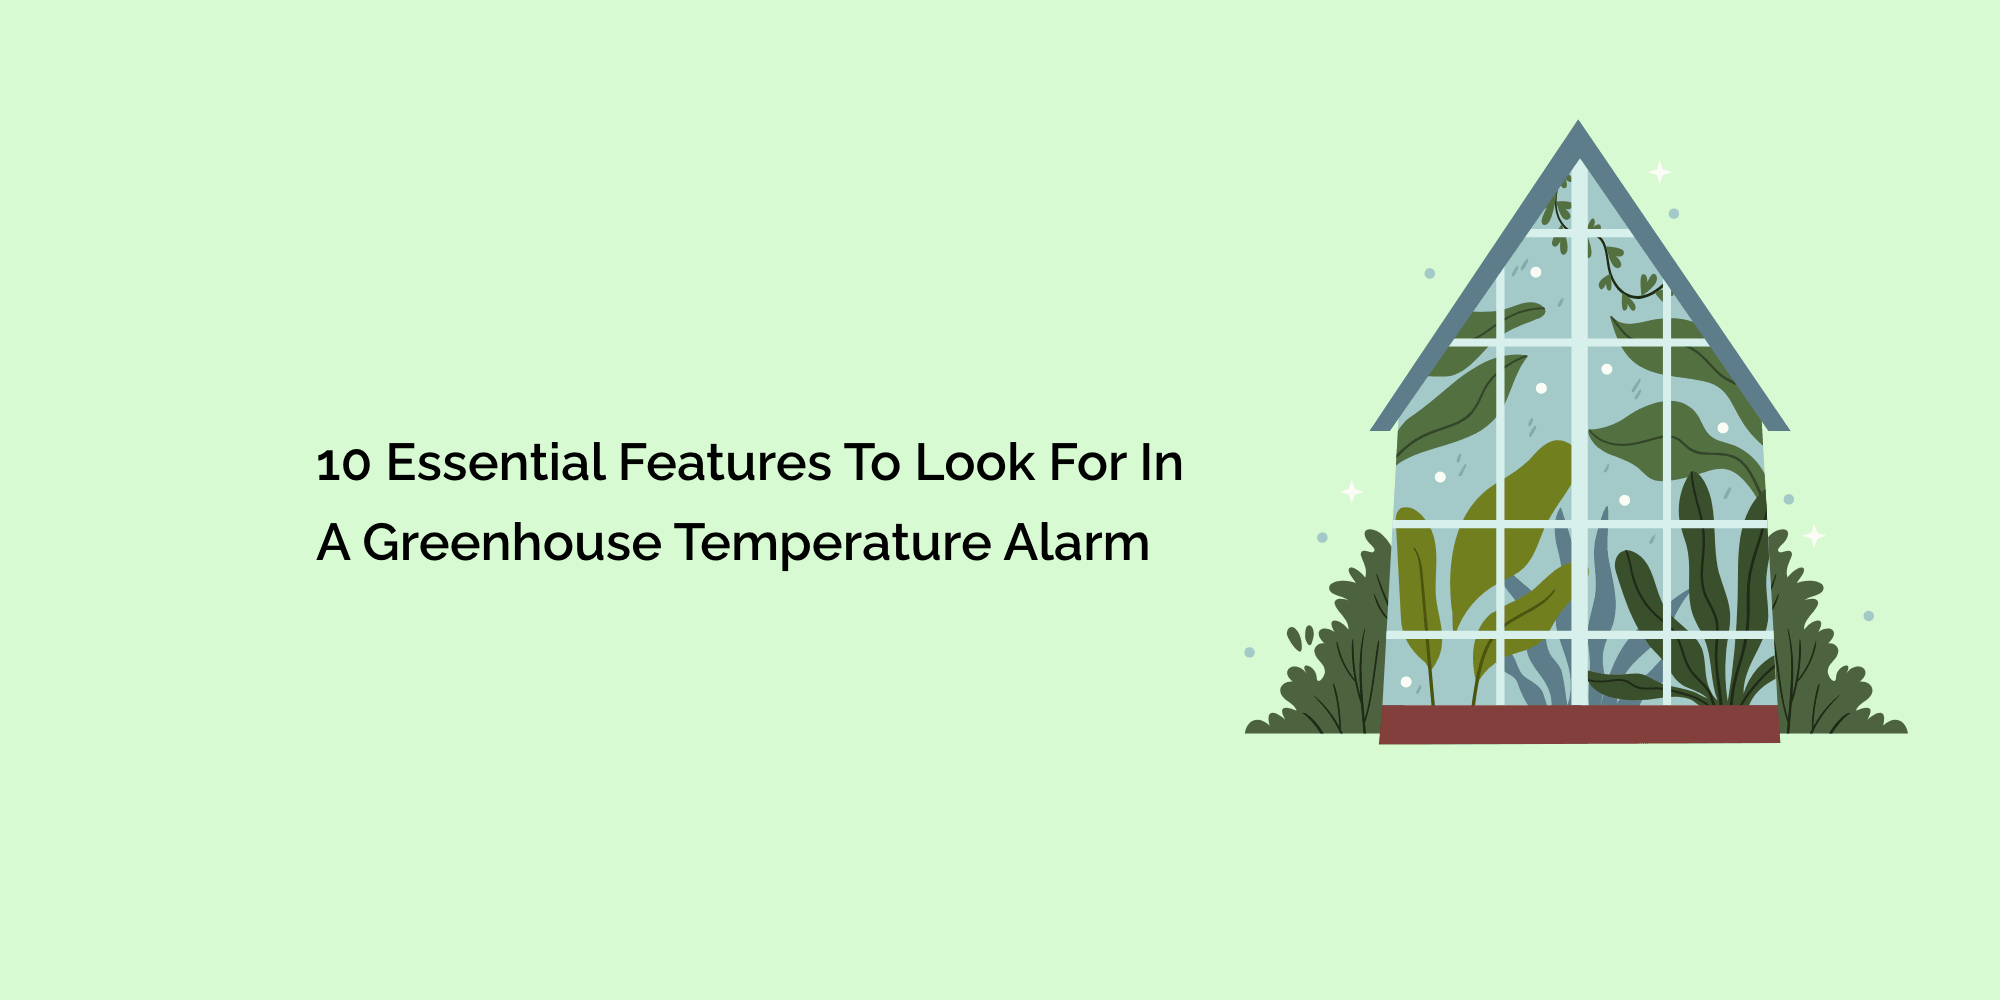 10 Essential Features to Look for in a Greenhouse Temperature Alarm